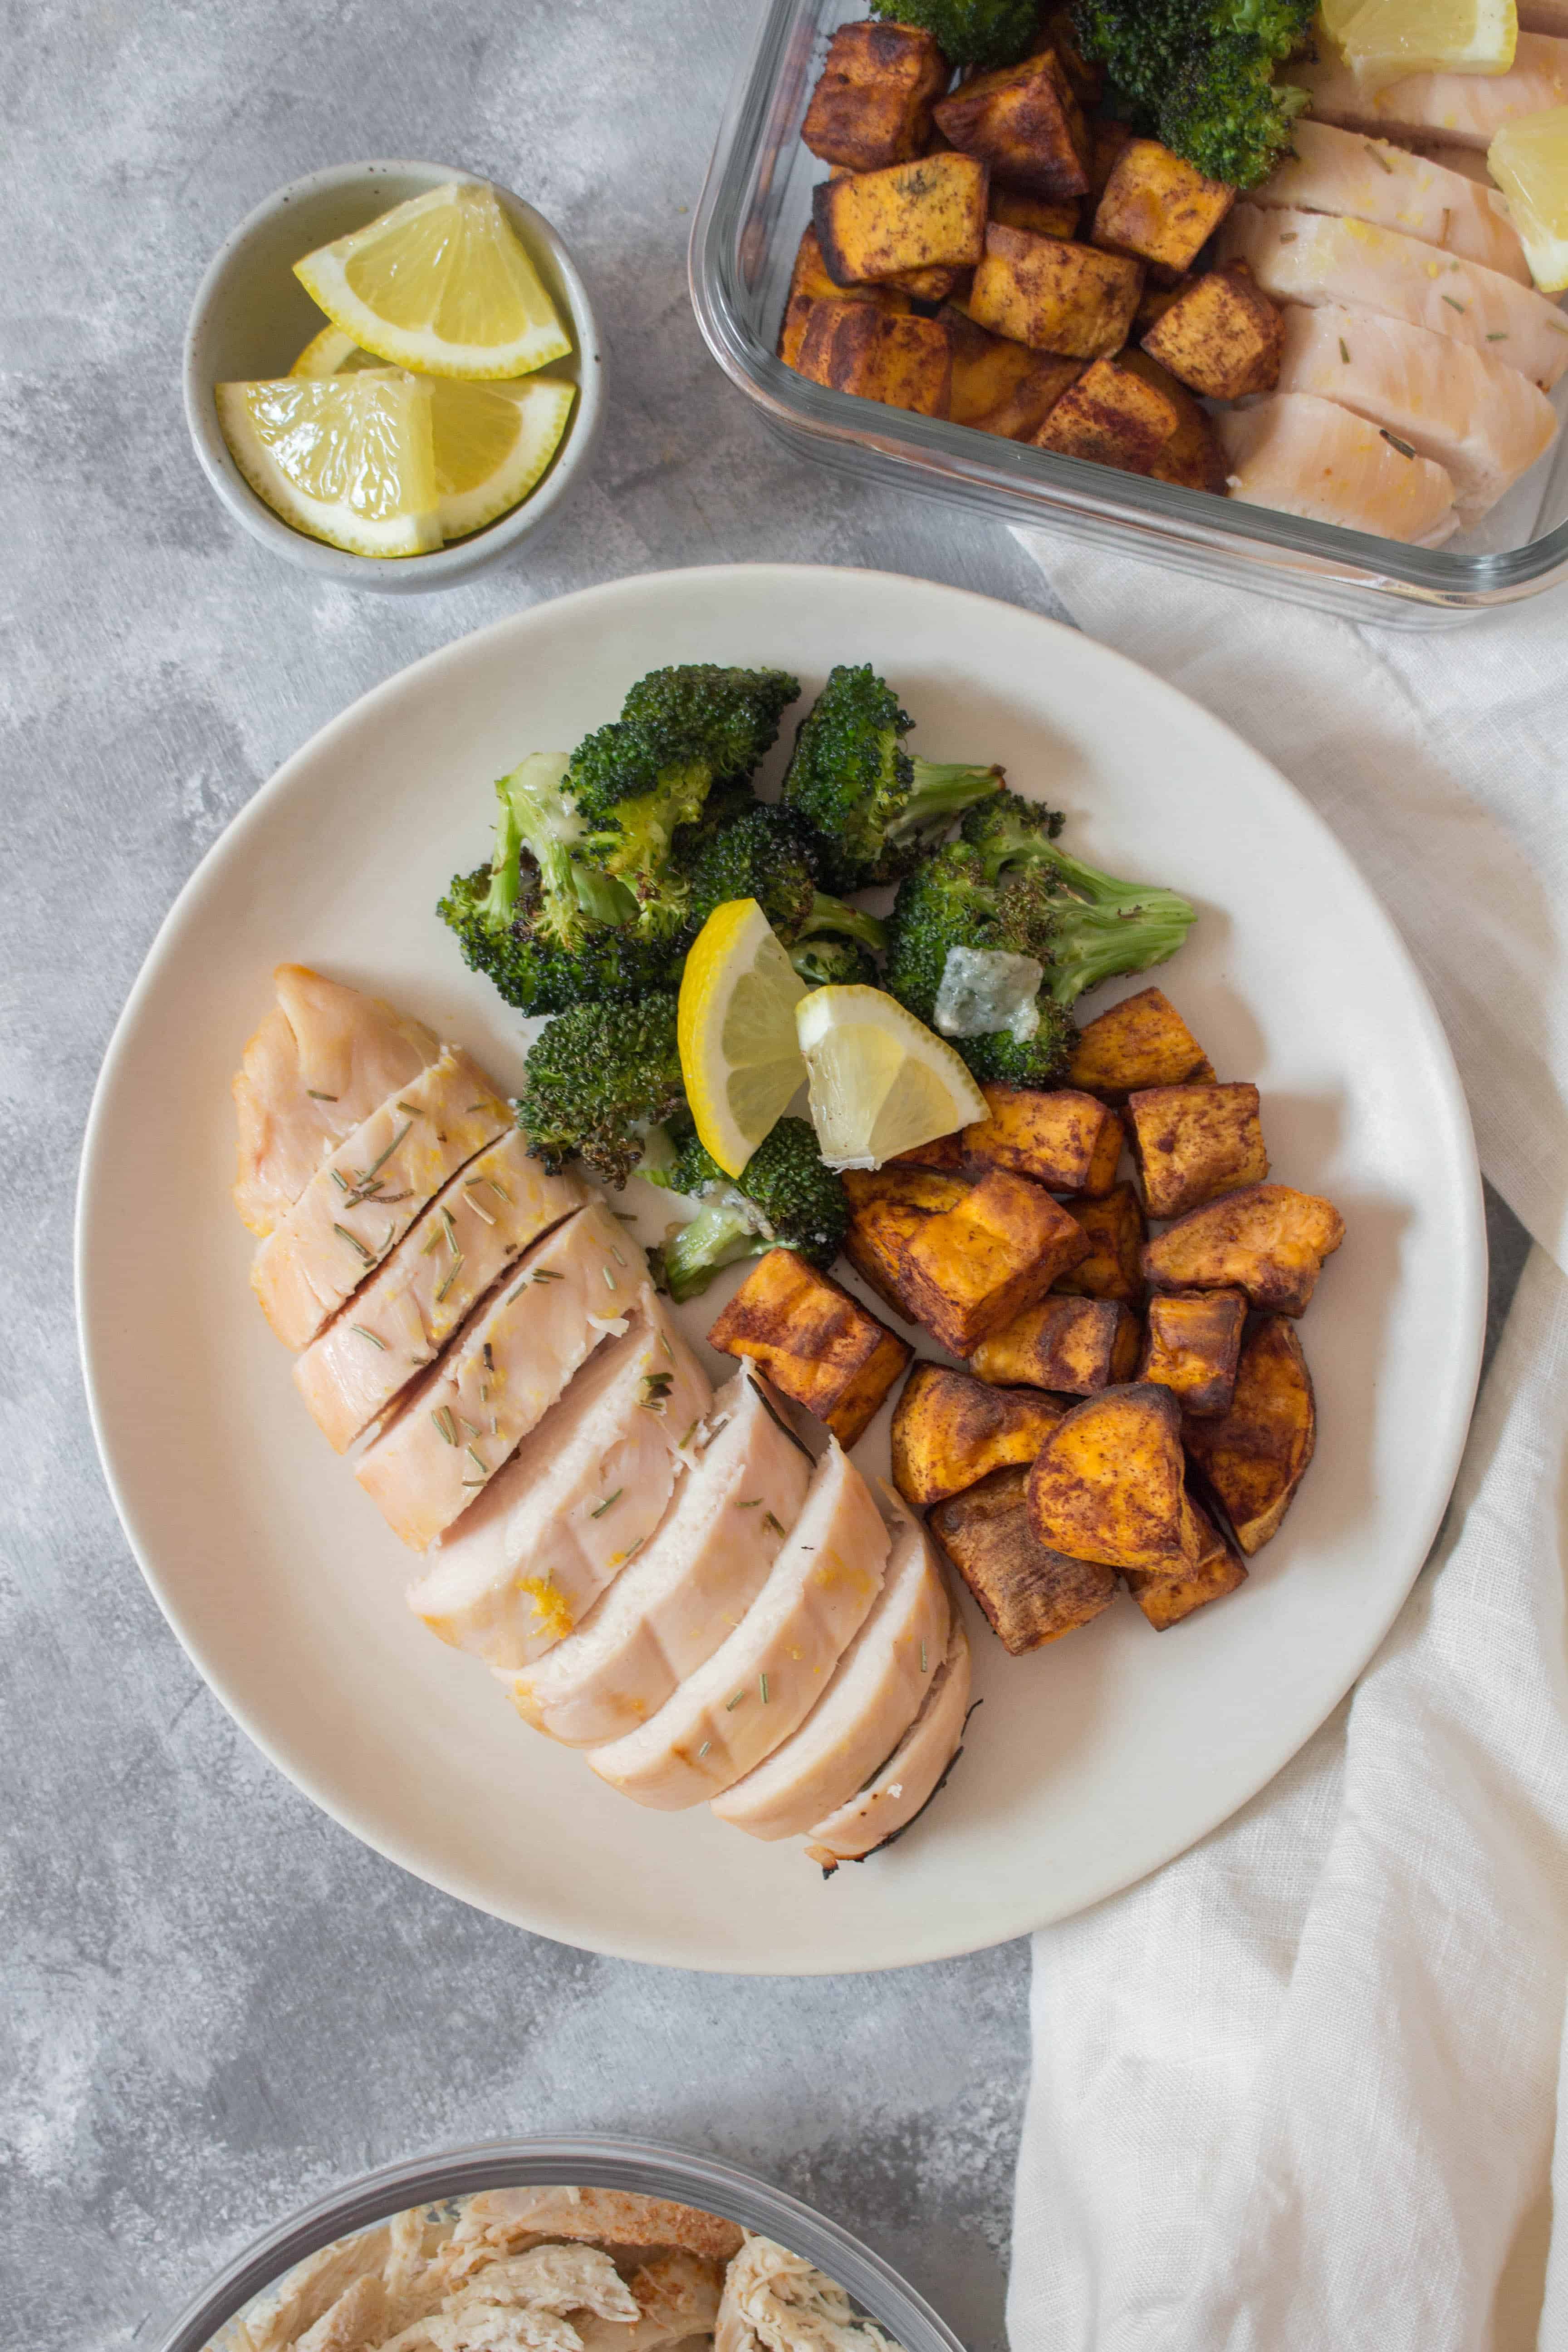 This Rosemary Citrus Chicken Meal Prep is such a refreshing dish - it is so light and the acid gives it such a fresh flavour. Made with a combination of lemon, lime, orange juice, and rosemary, you’re going to look forward to lunch! Plus, when served with a side of cinnamon roasted sweet potatoes and parmesan broccoli, this meal prep will make you excited for your work day.